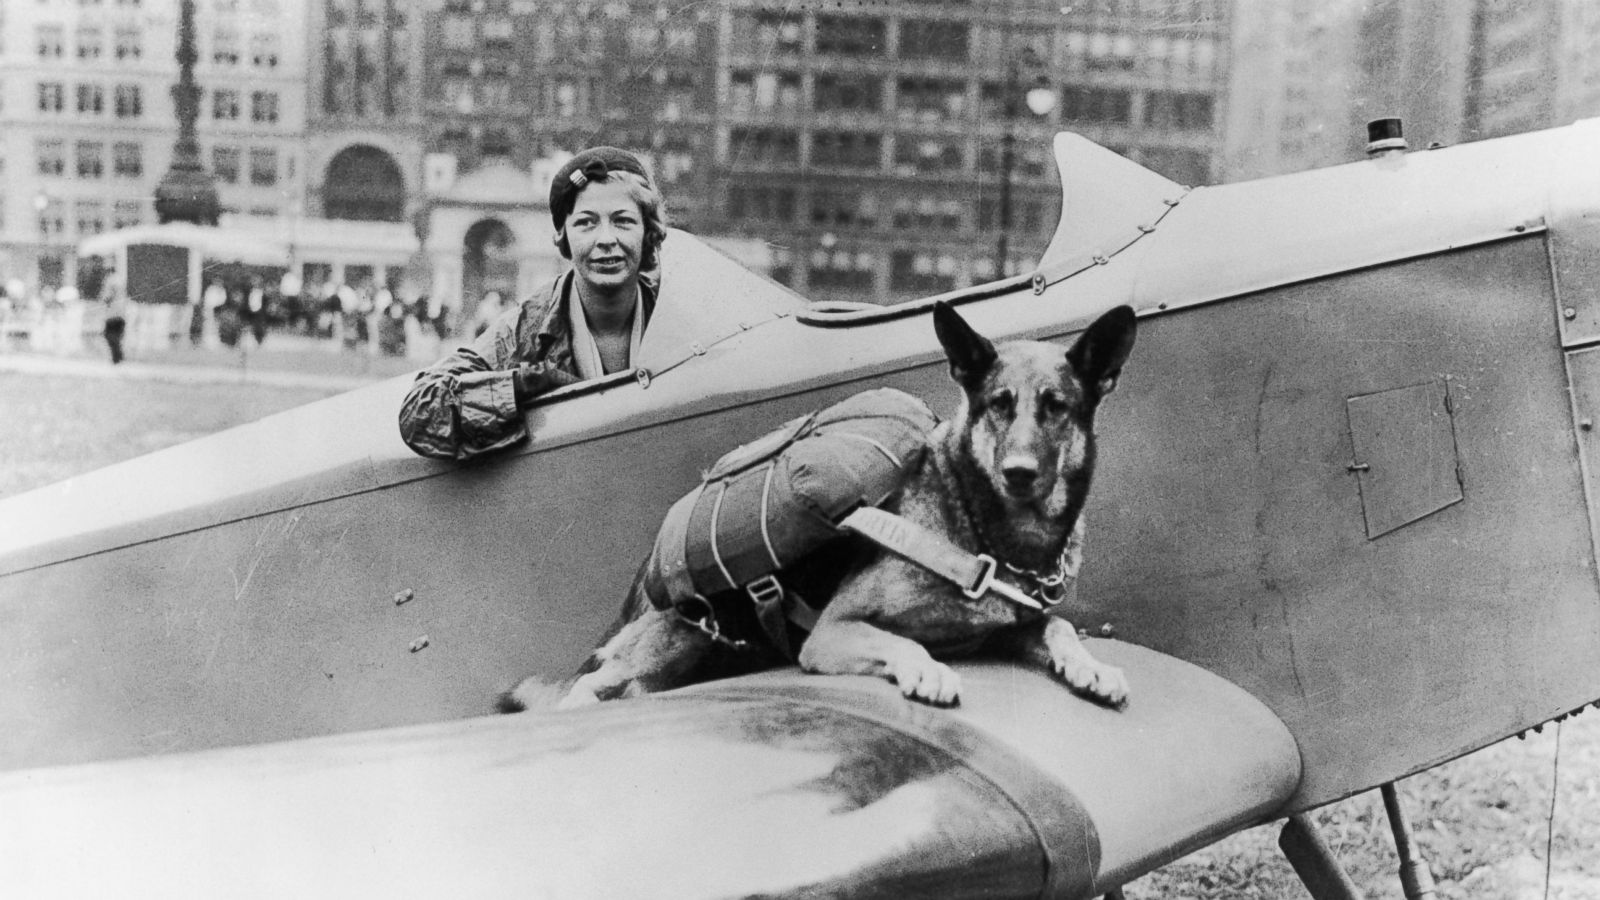 Britain's Luftwoofe: The Heroic Paradogs of World War II - ABC News